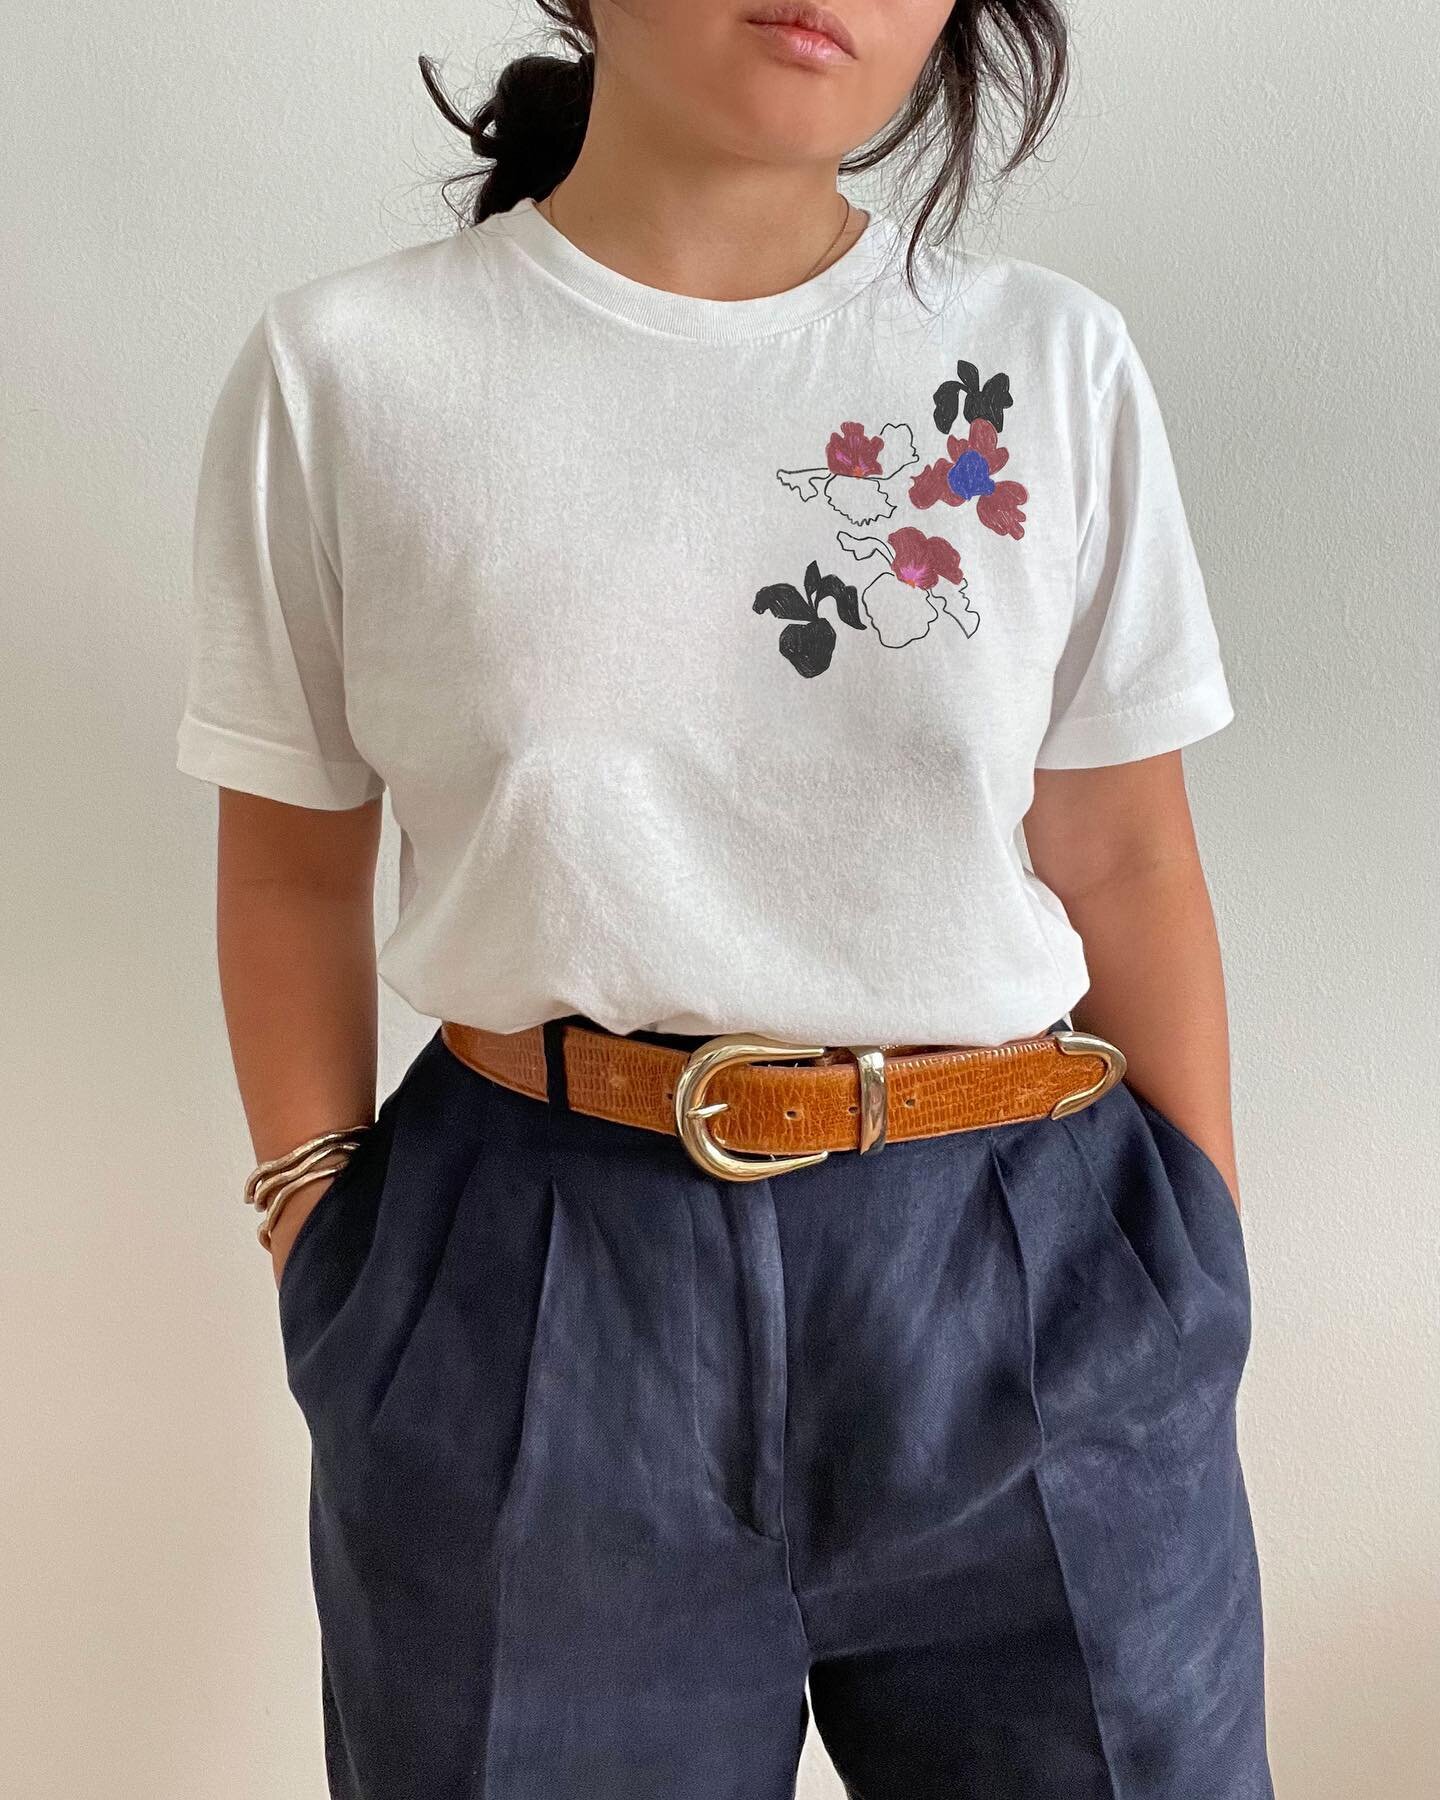 A NEW favorite in the shop&mdash;the Iris tee! Colorful hand drawn Iris flowers taken straight from a page in my sketchbook and made to dance upon your shoulder. ✨ 

Be sure to check out my other new products as part of this drop!

#shopalyssaguerrer